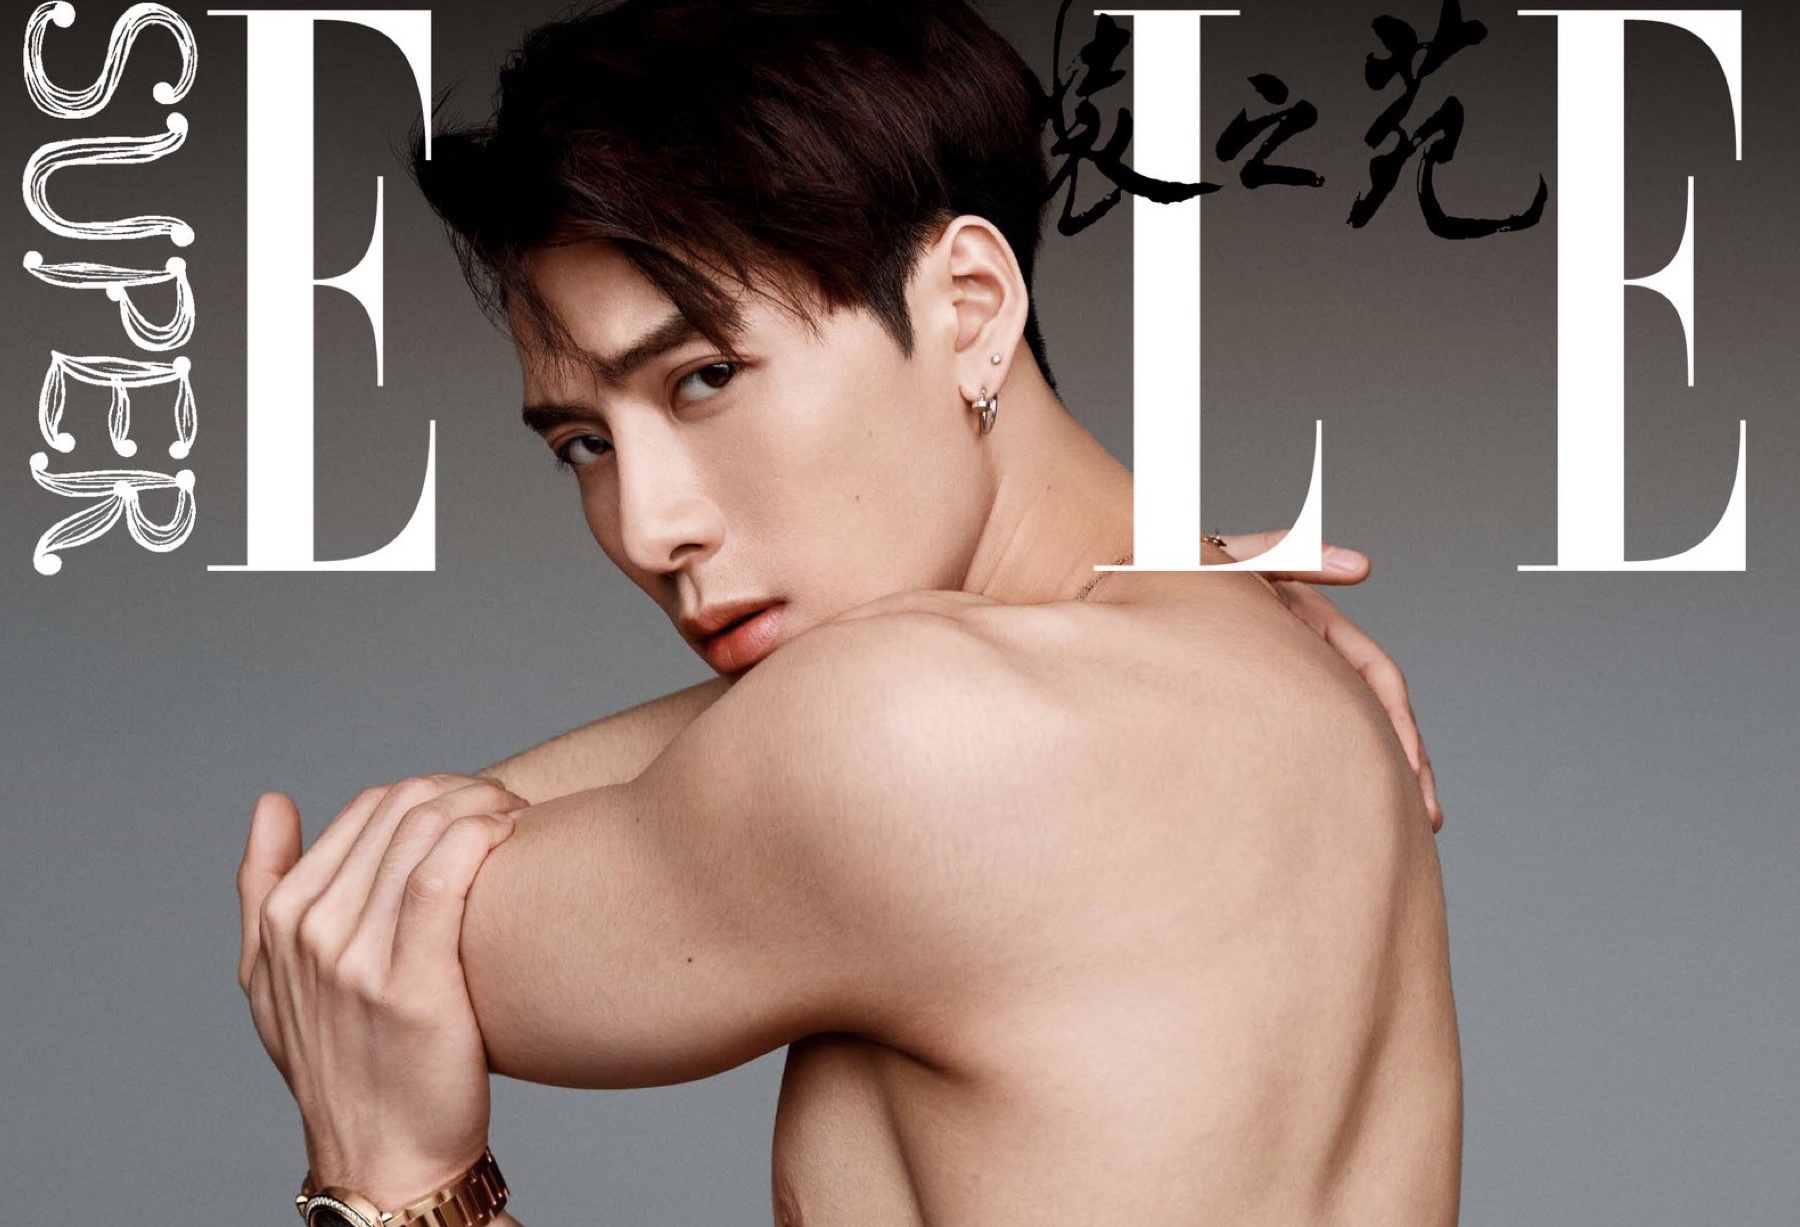 GOT7’s Jackson Wang grace cover for August SuperElle + reveal his tattoos